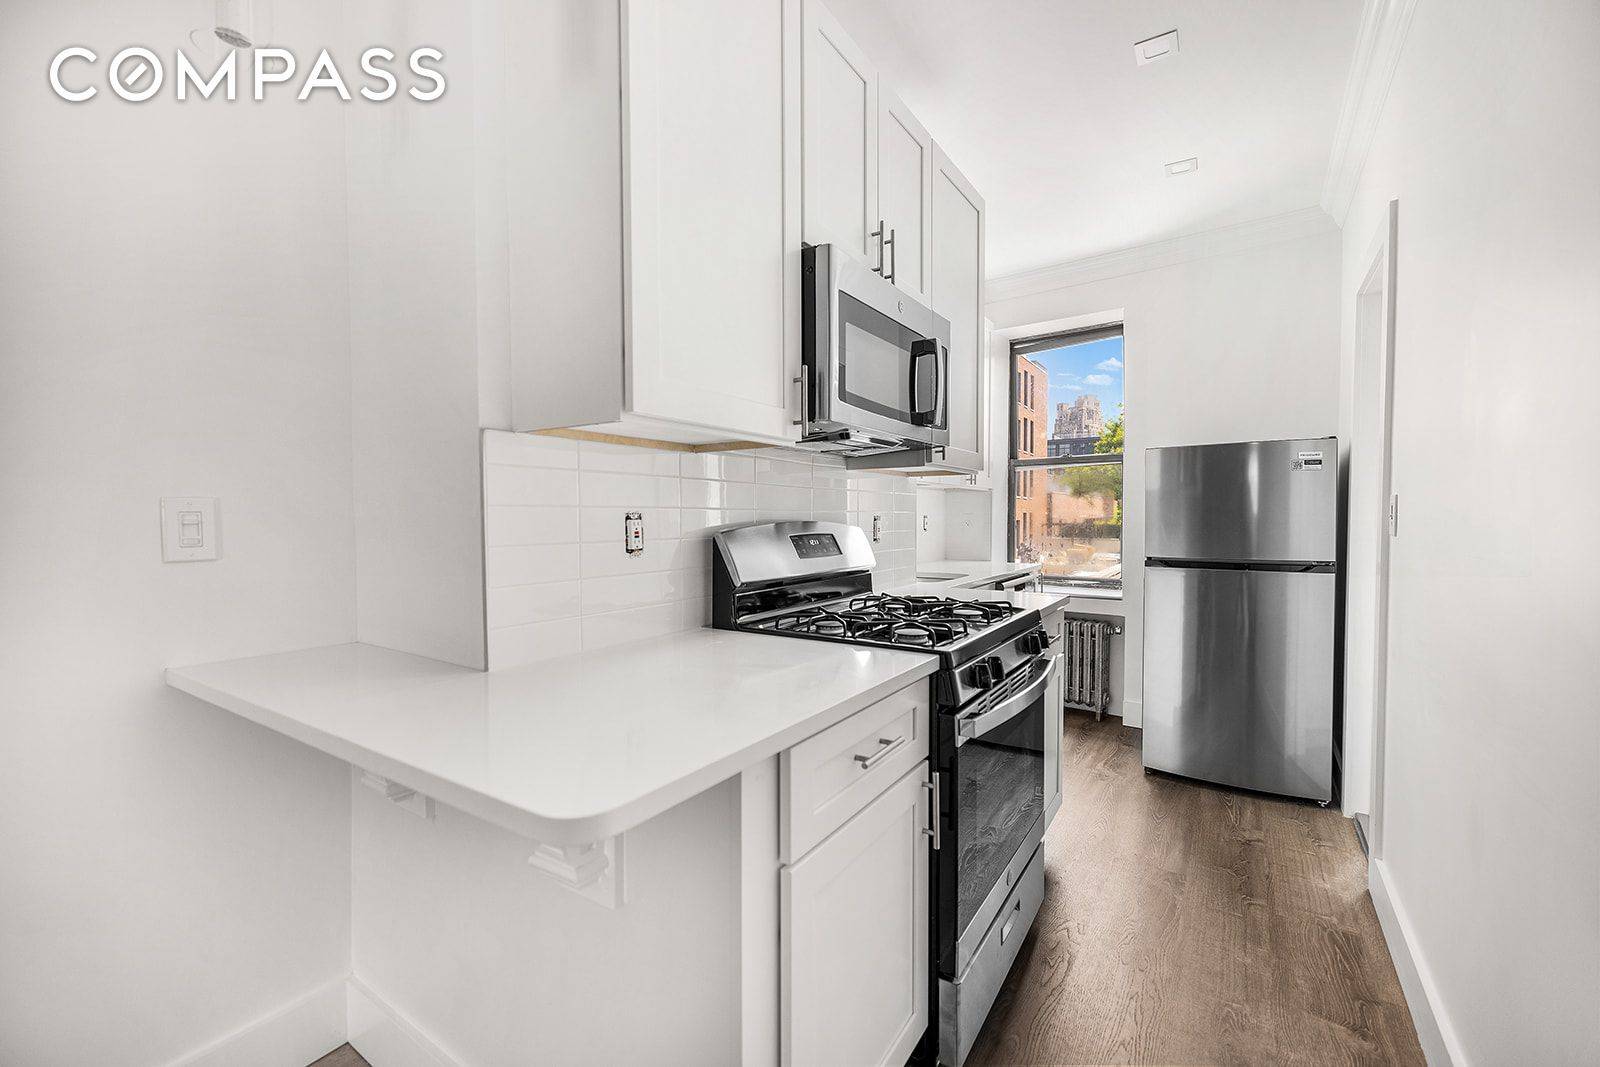 Floor 3 at 805 Washington St is a charming and spacious newly gut renovated one bedroom in the heart of the West Village Meatpacking District, no detail was overlooked by ...